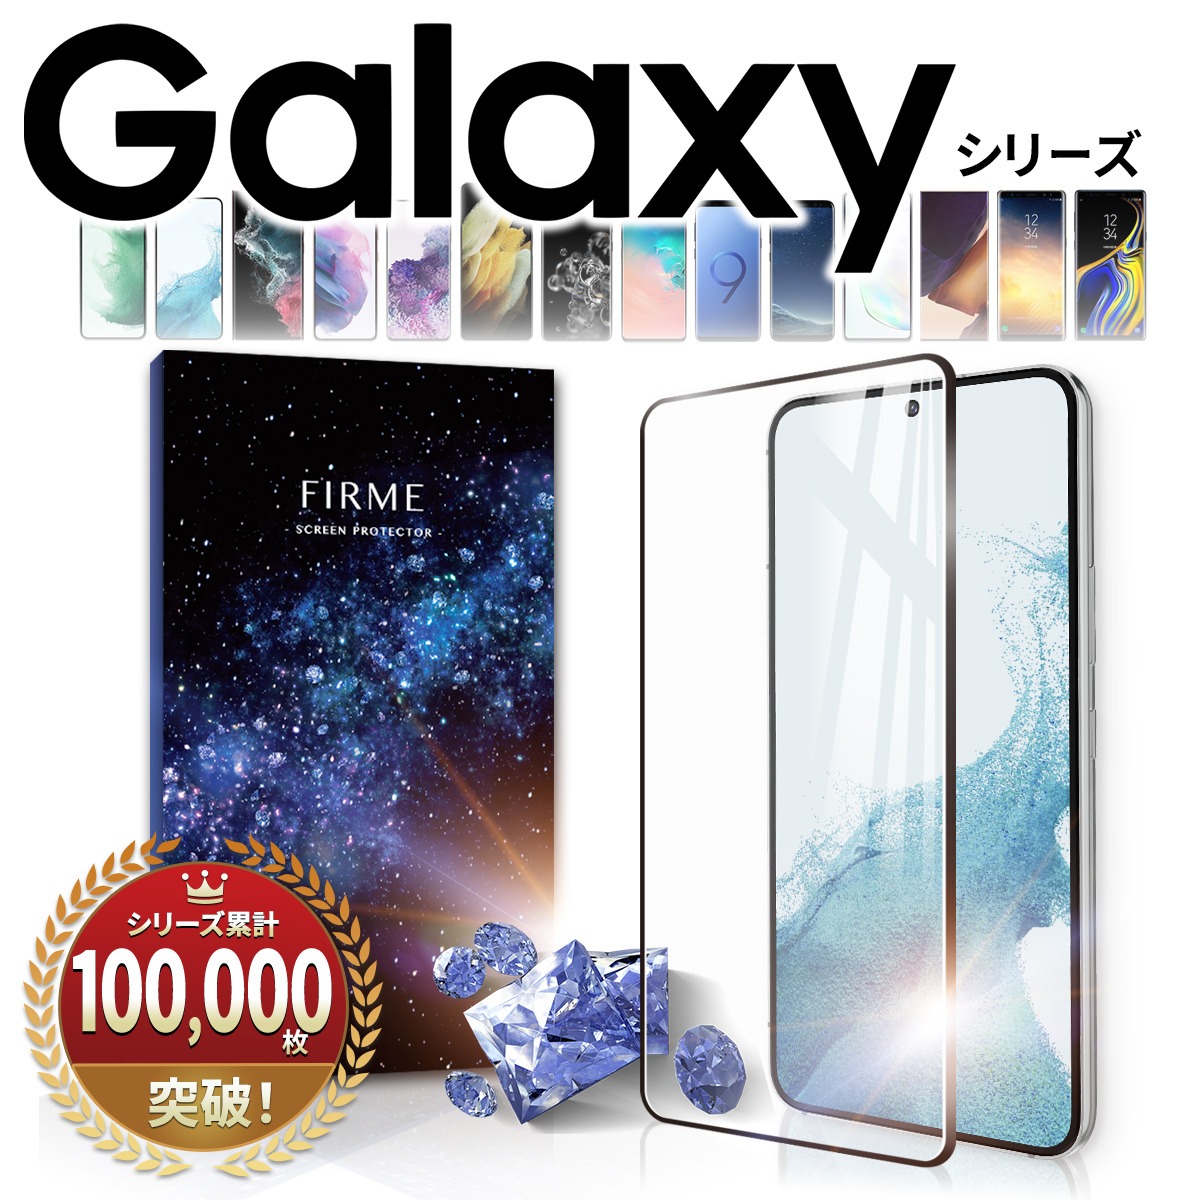 Galaxy S23 ガラス フィルム S23 Ultra S22 S21 S21+ S10+ S20 S22 ultra 5G S10 S9  ギャラクシー 液晶 保護フィルム カバー 全面 硝子 3D 10H 透明 クリア